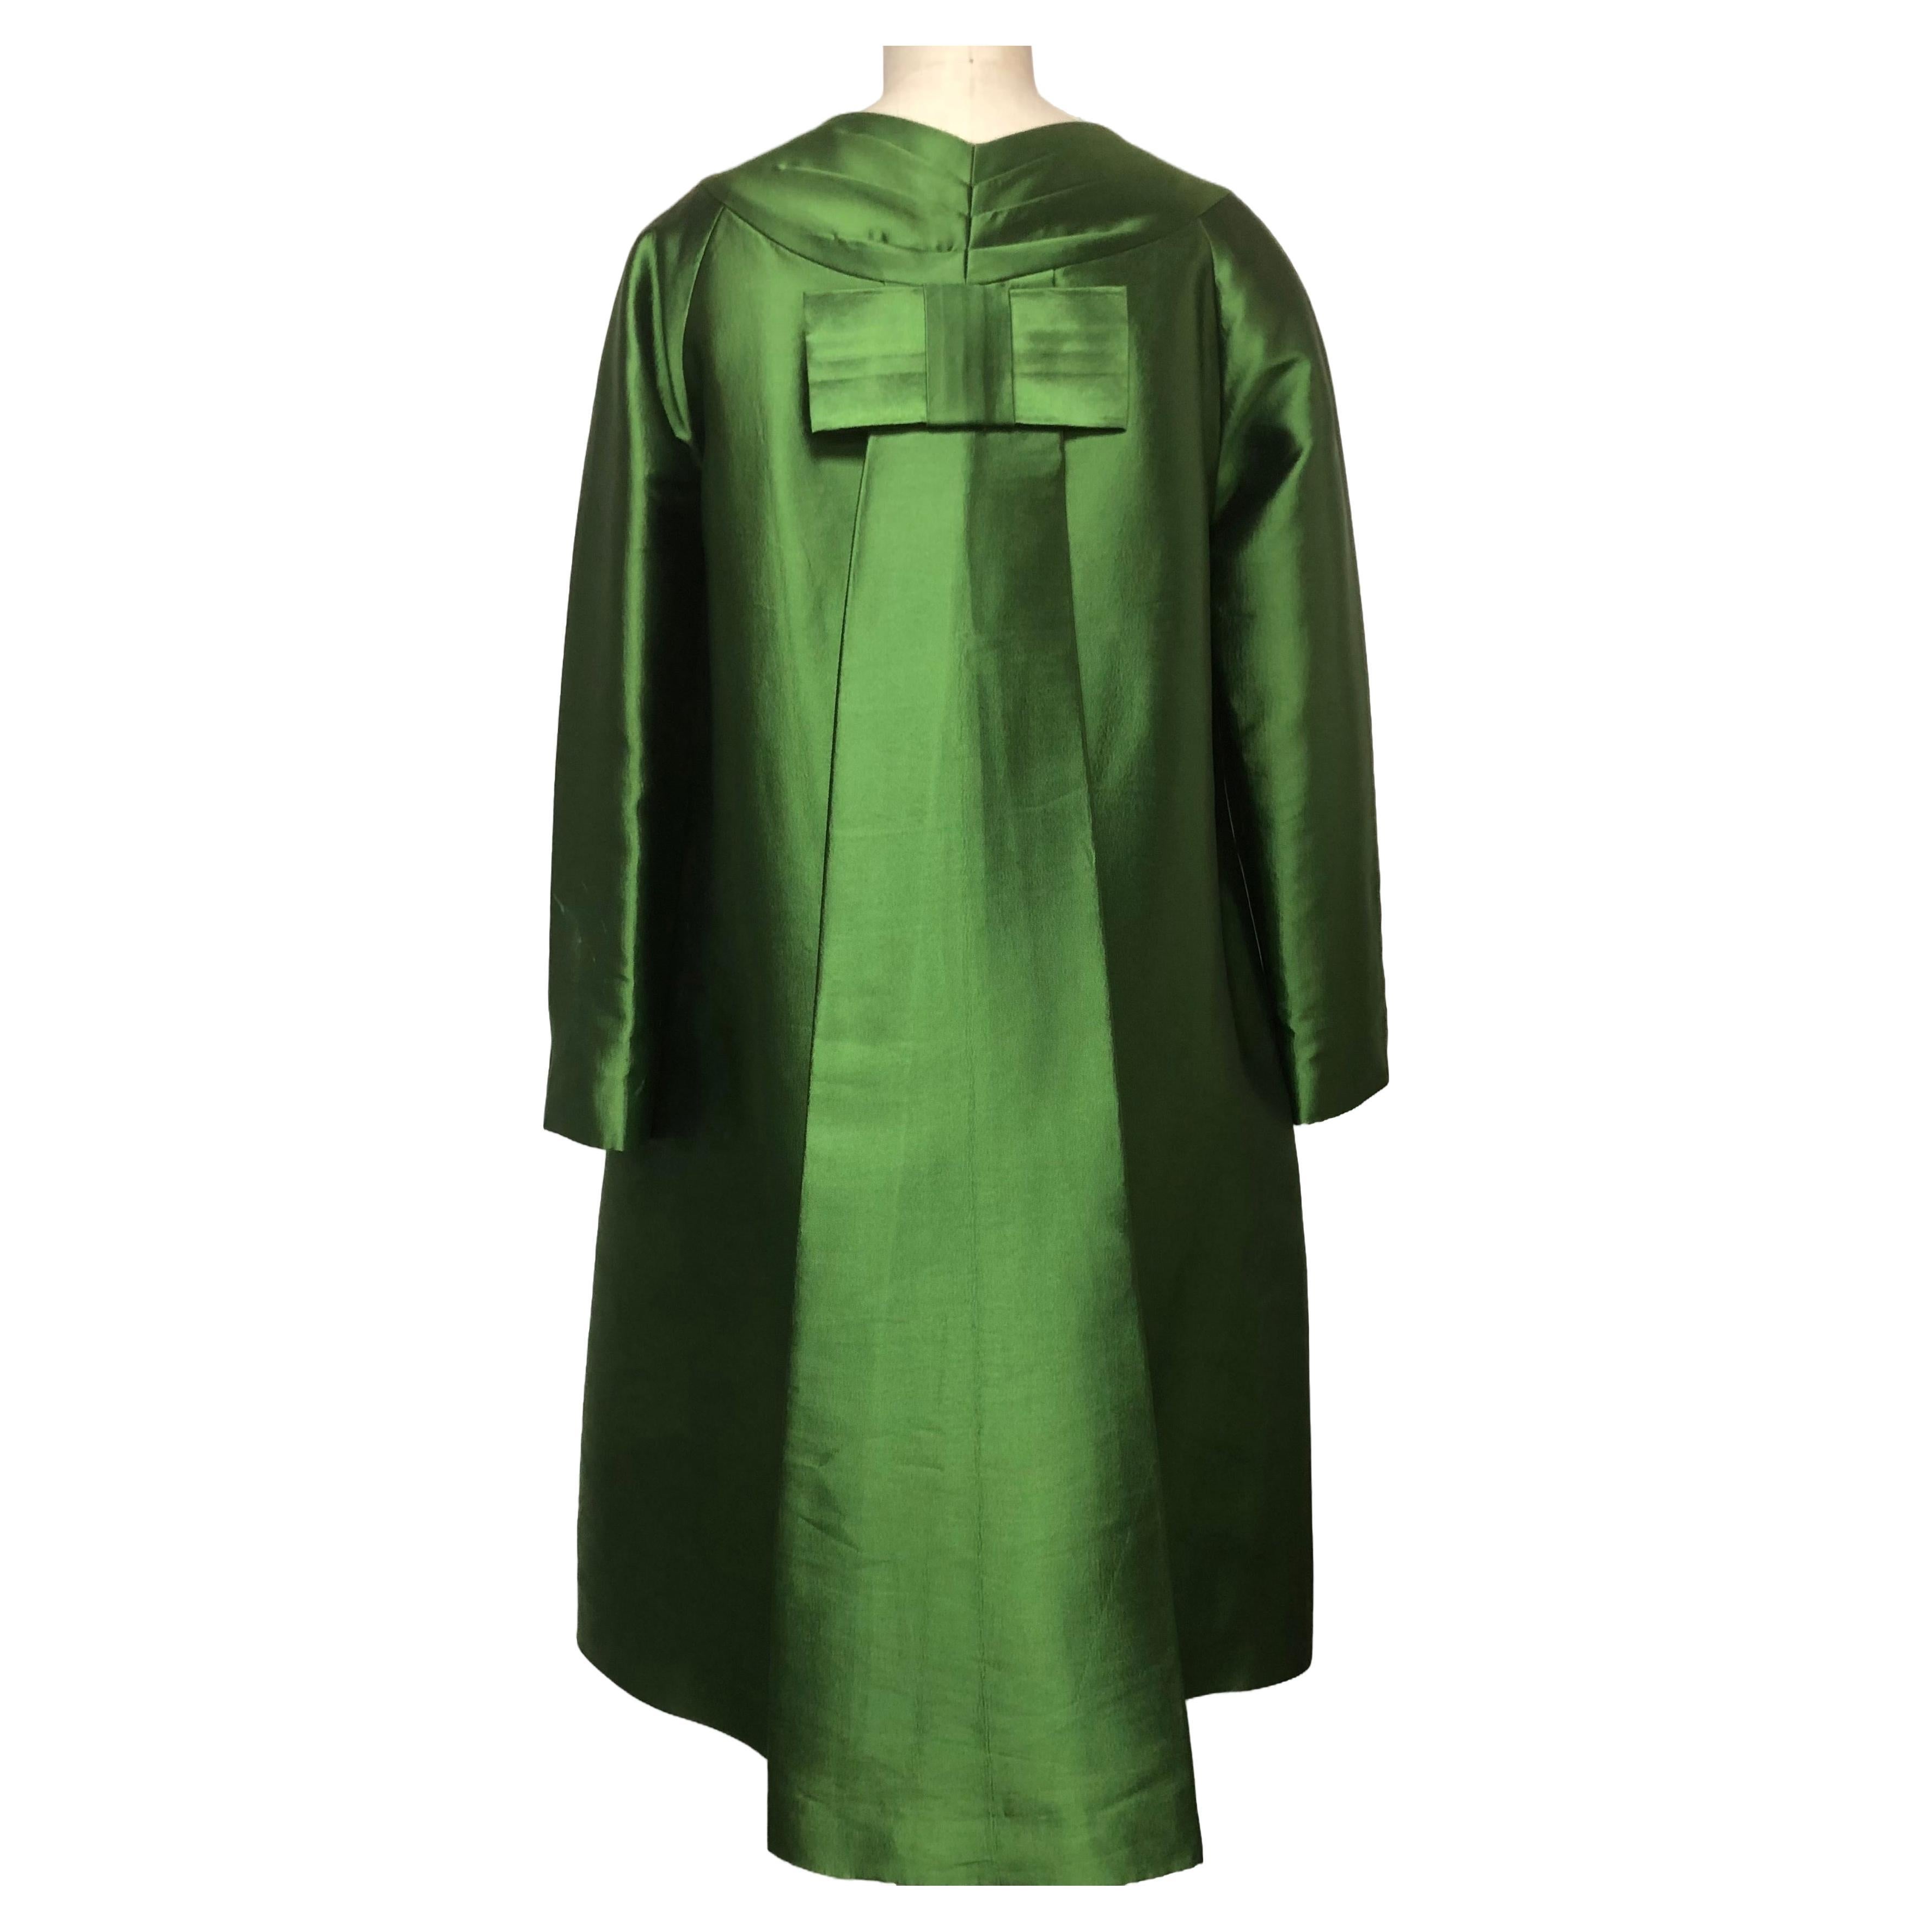 A charming Opera Coat of 100% French  Emerald Silk Mikado from Sfate and Combier- maker of the finest Couture Textiles. The Pleat Back is Secured with a  Bow. A Roomy Coat  that comfortably fits over Dresses etc.
A wink and a nod to the glamour of